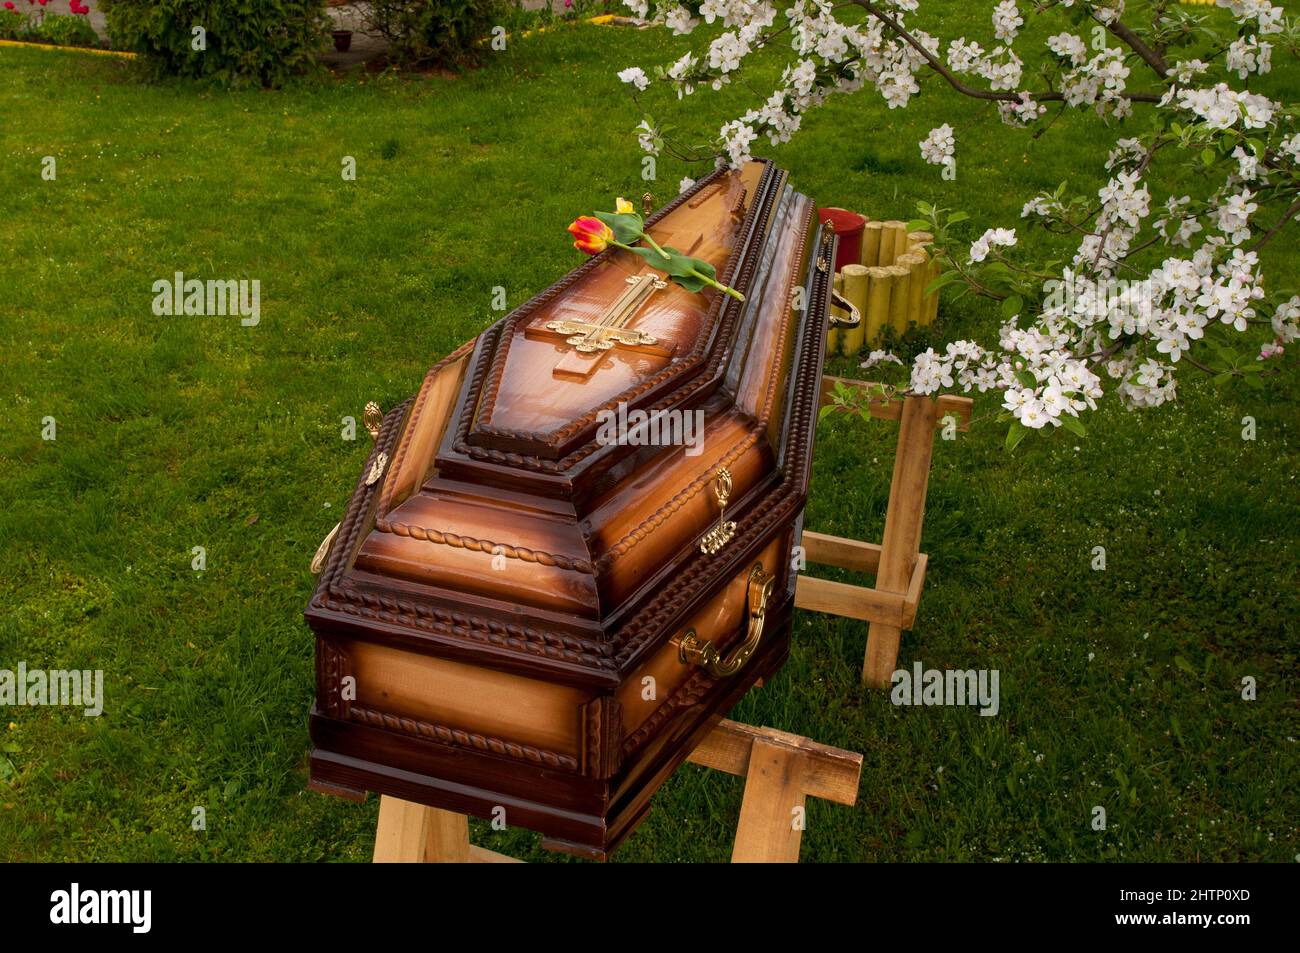 Wooden tomb, cross decoration, ornament, massive handles for burial Stock Photo